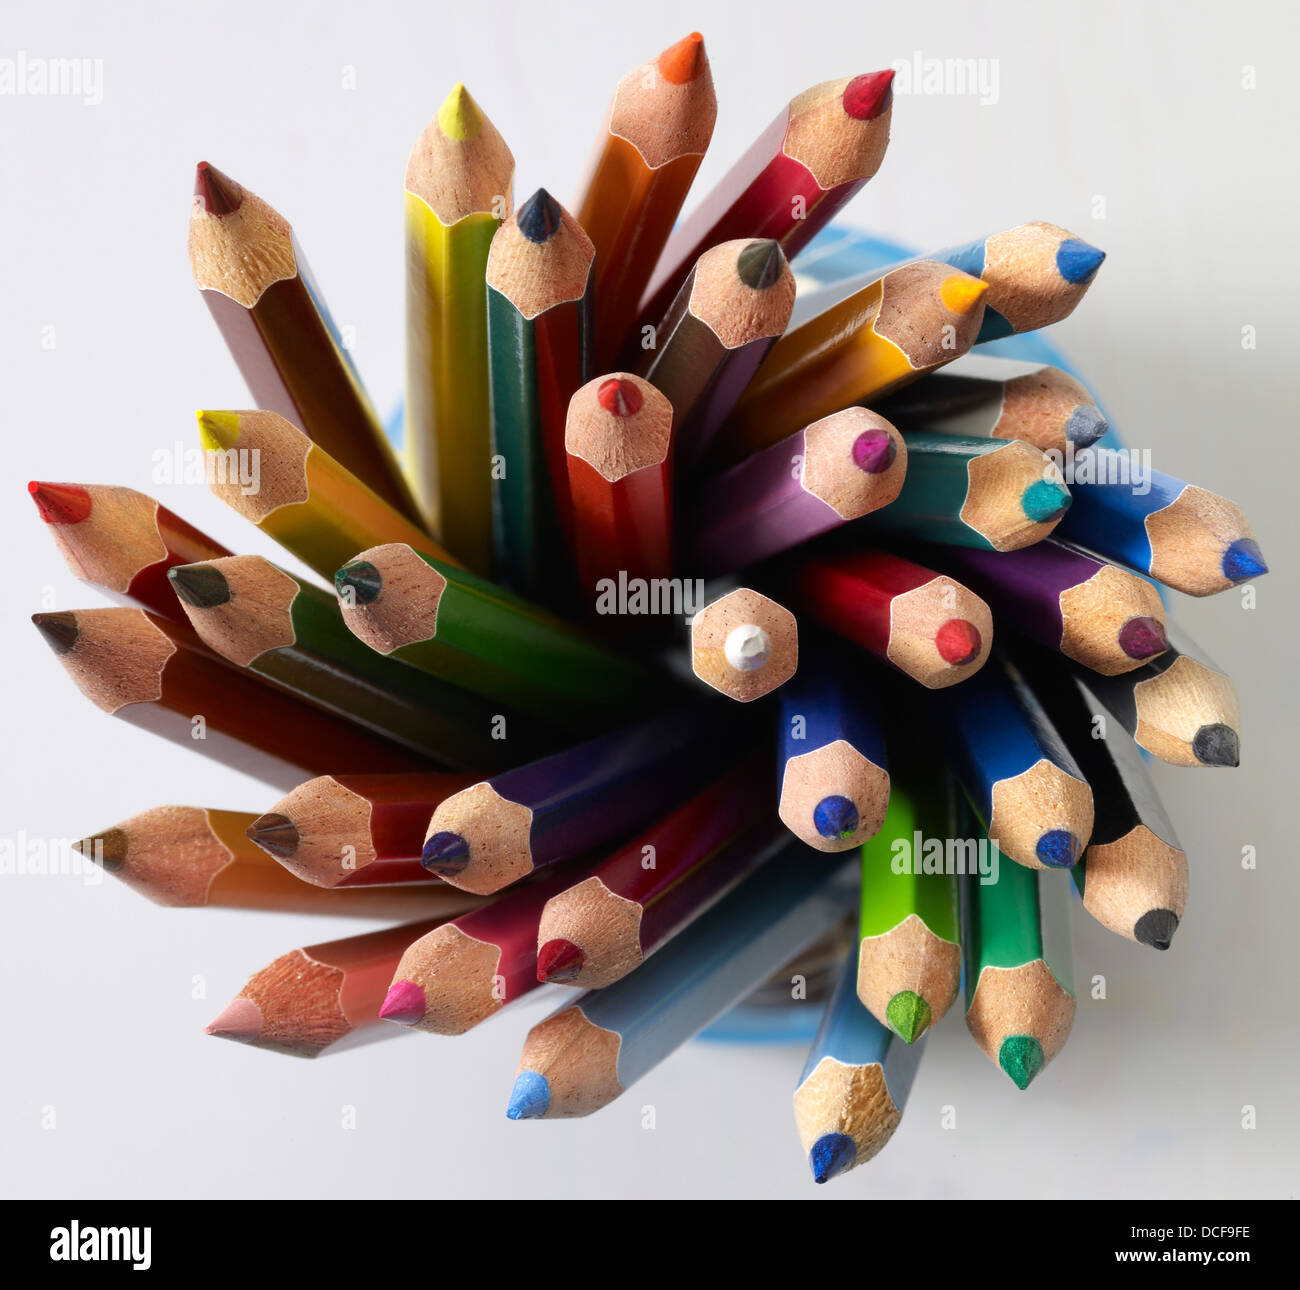 detail shot showing lots of multicolored pencil tips Stock Photo